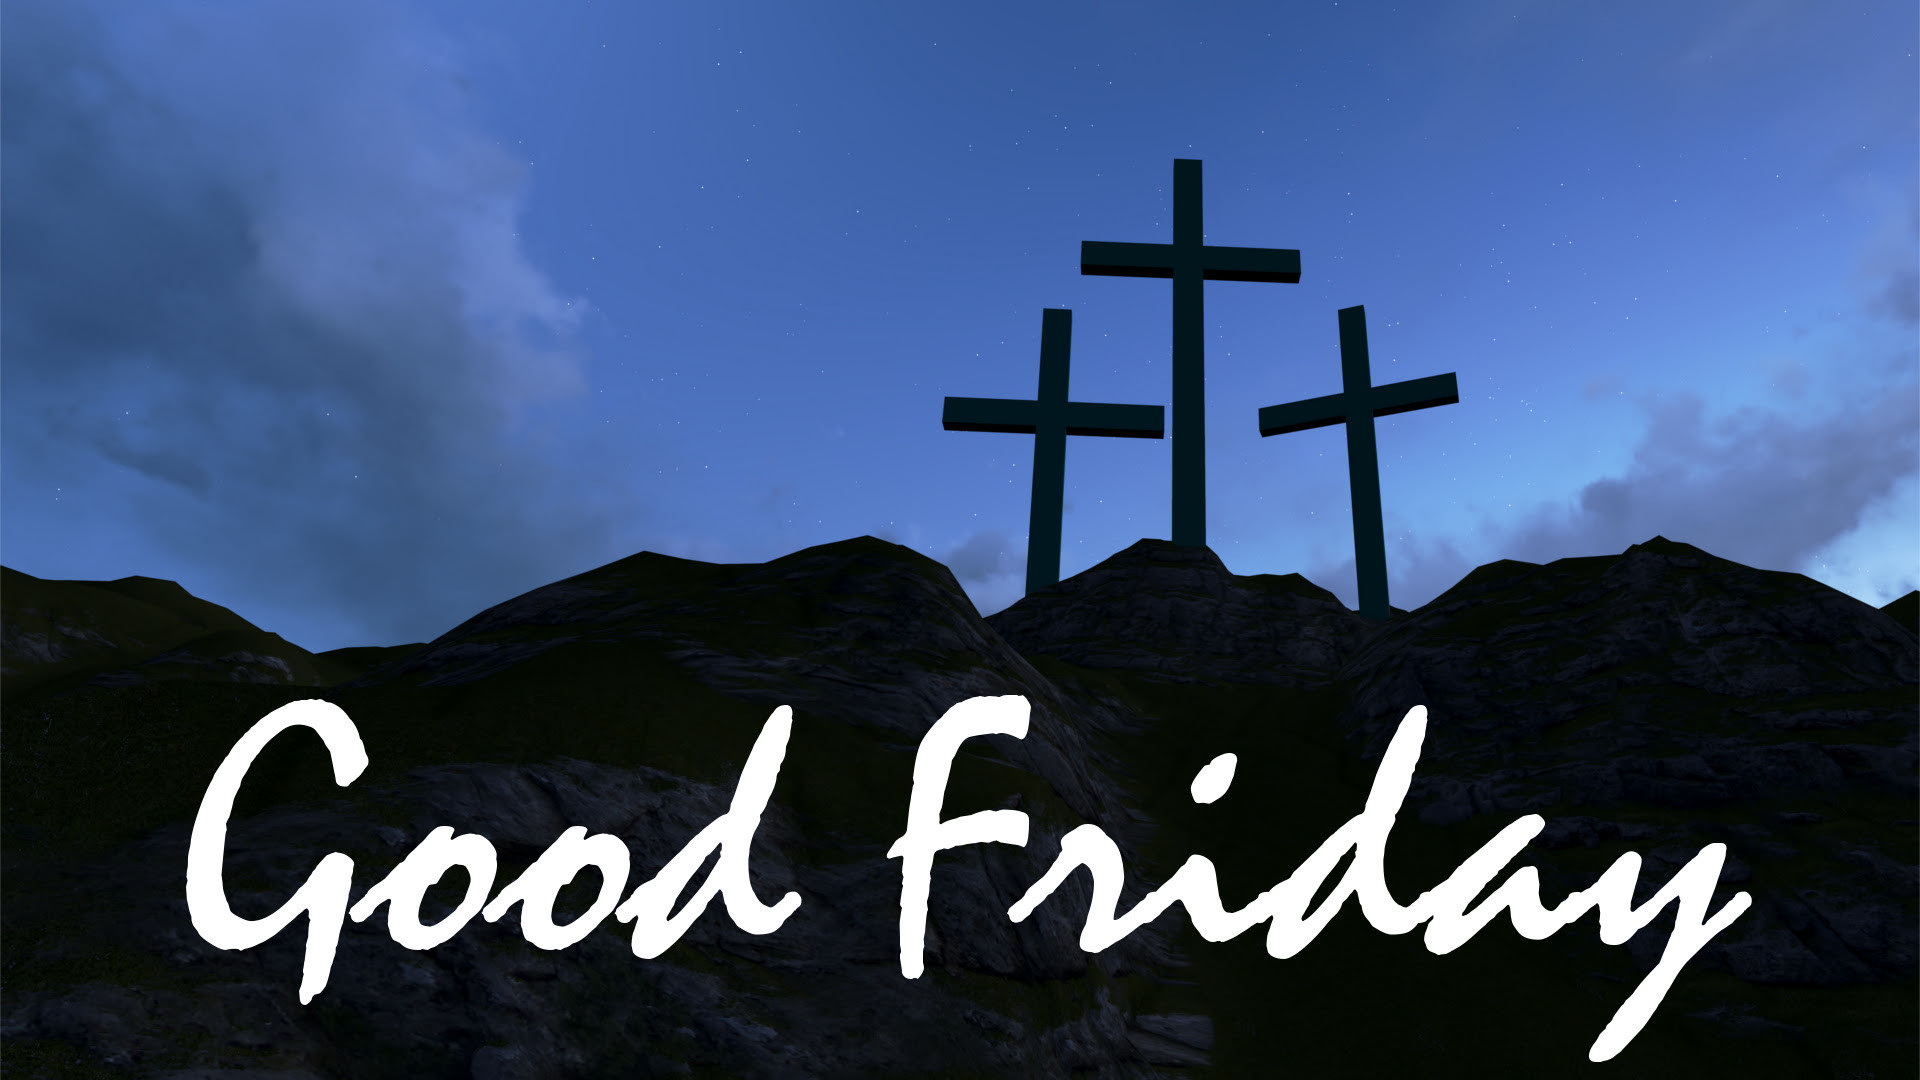 1920x1080  1920 x 1080 pxGood Friday 2017 Images | HD Wallpapers, Gifs,  Backgrounds, Images. Good Friday free images download.